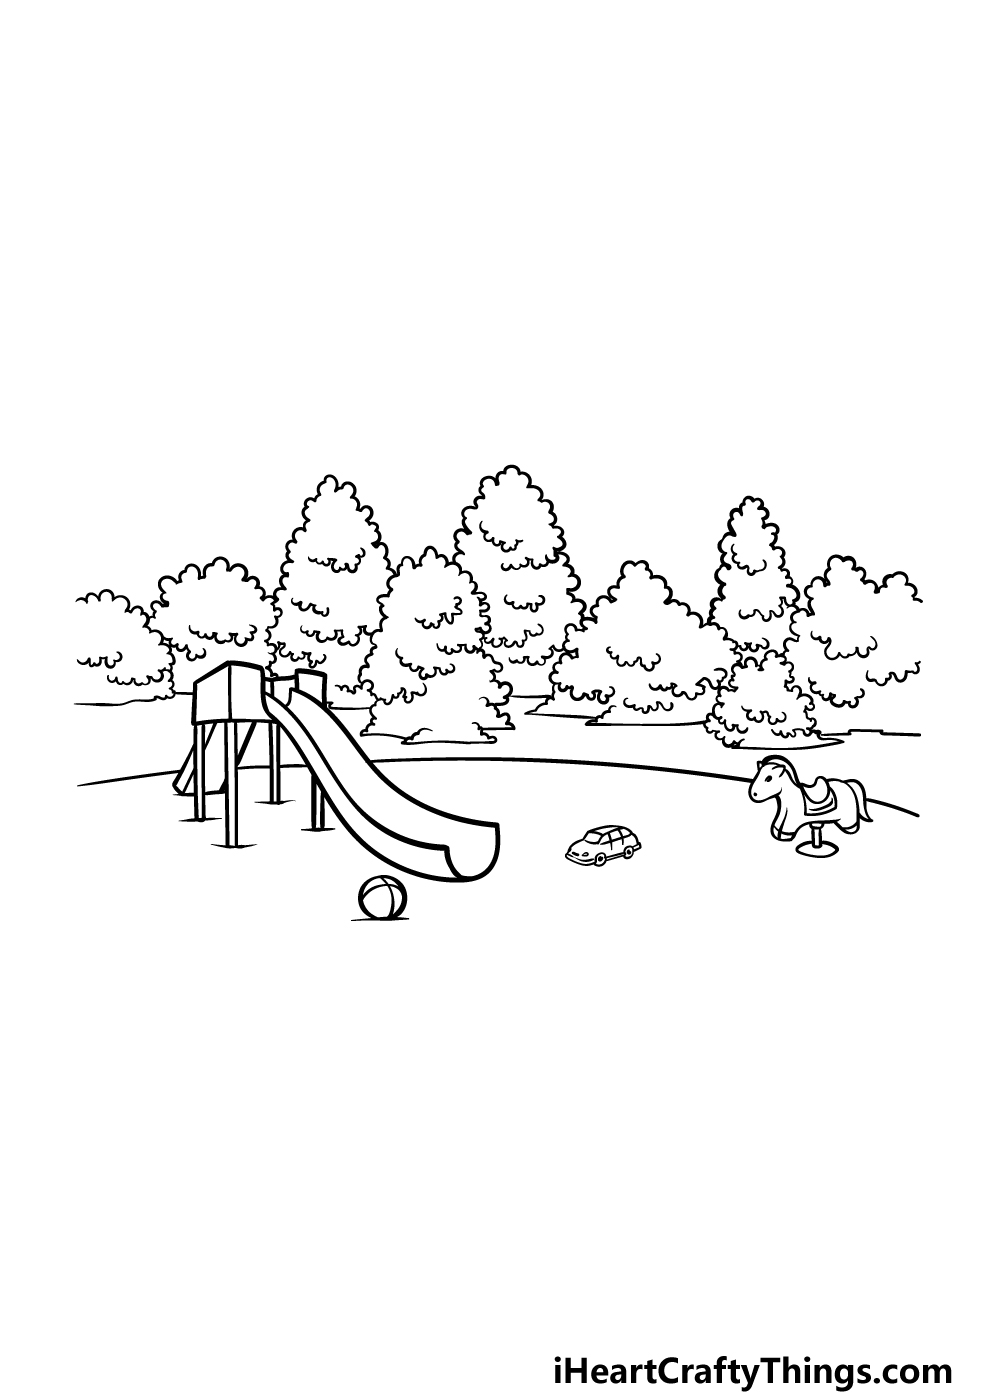 how to draw a Playground step 4